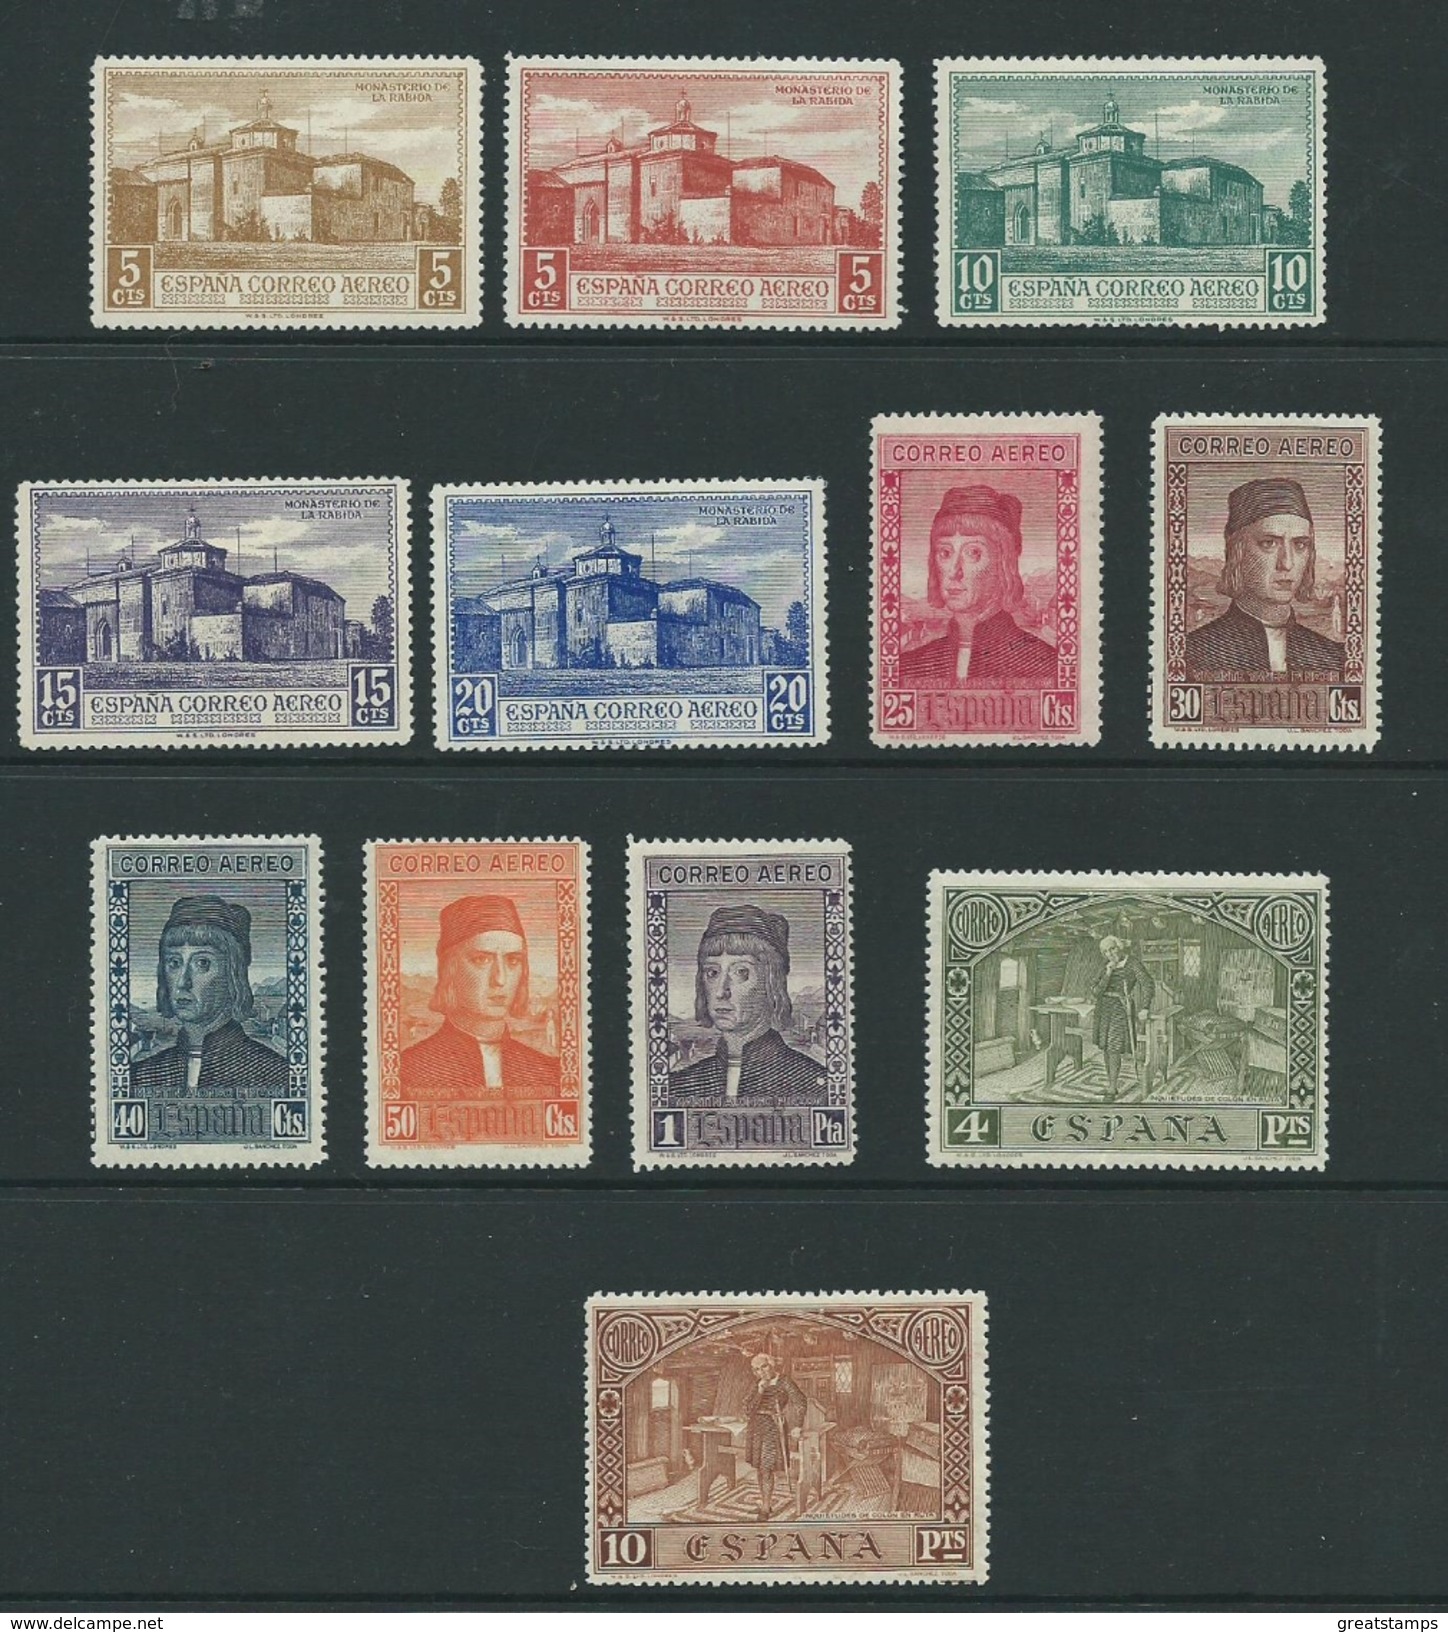 Spain Stamps Mh Columbus Air Set Sg608 /619 Europe And Africa Hinged - Unused Stamps